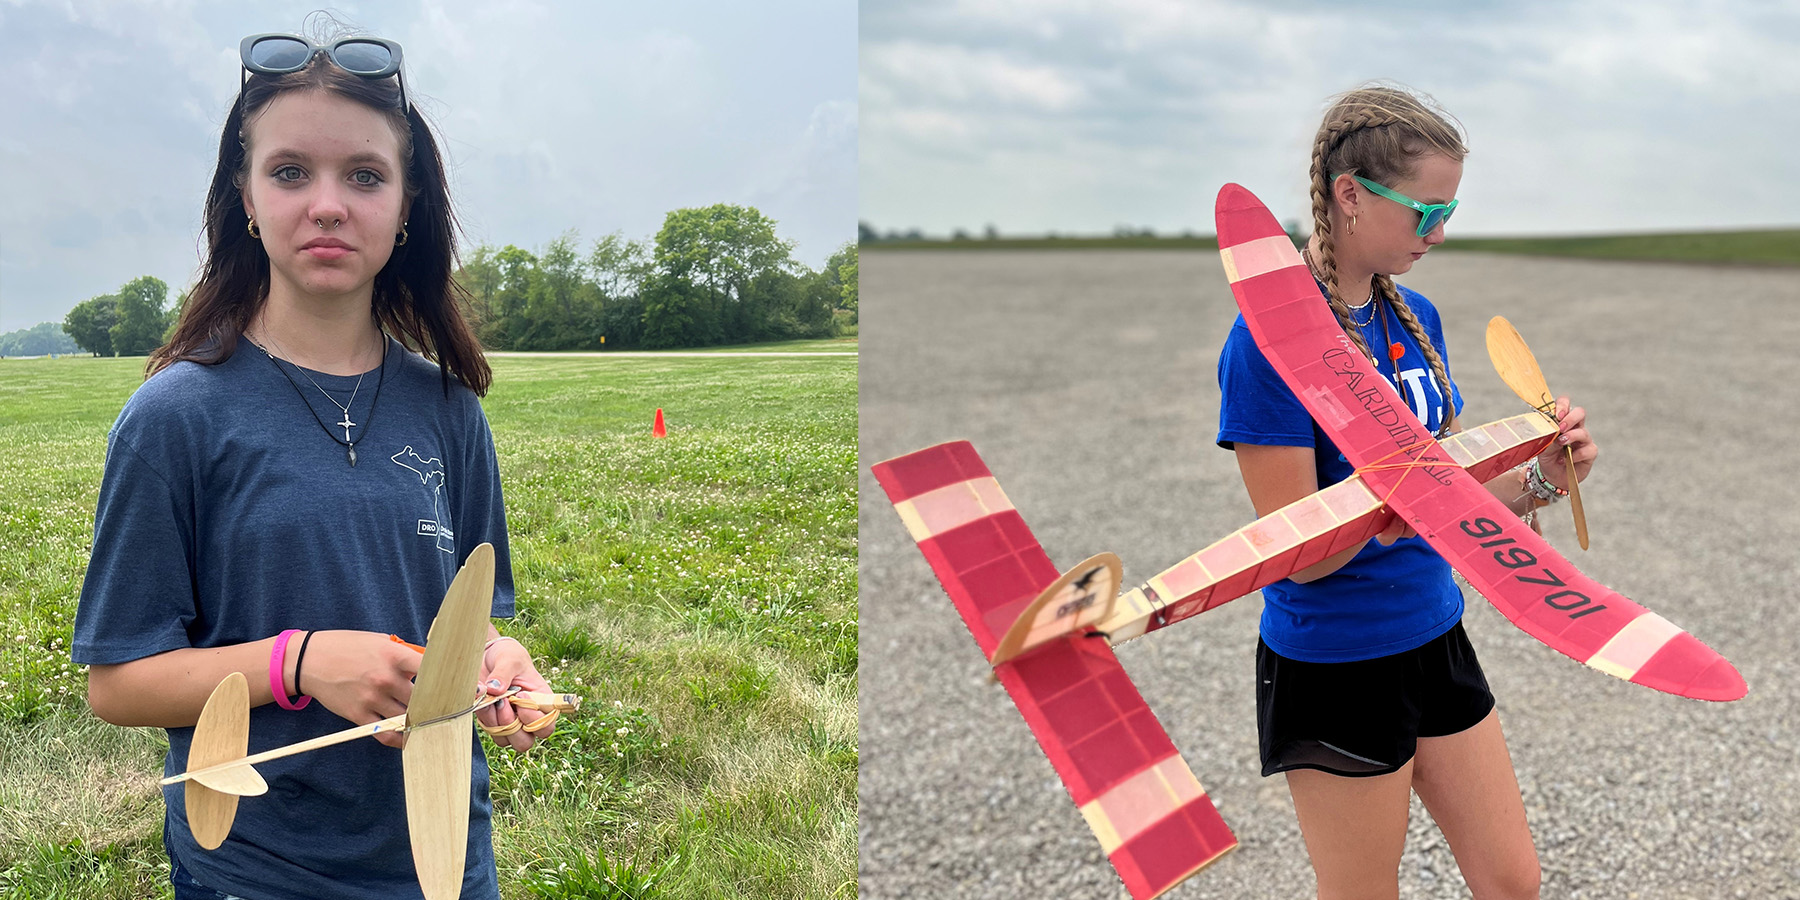 [L] Sarah Dalecki finished second in Junior Old Time Catapult glider.  [R]Skilly DeLoach flew her Golloywock to first place in J